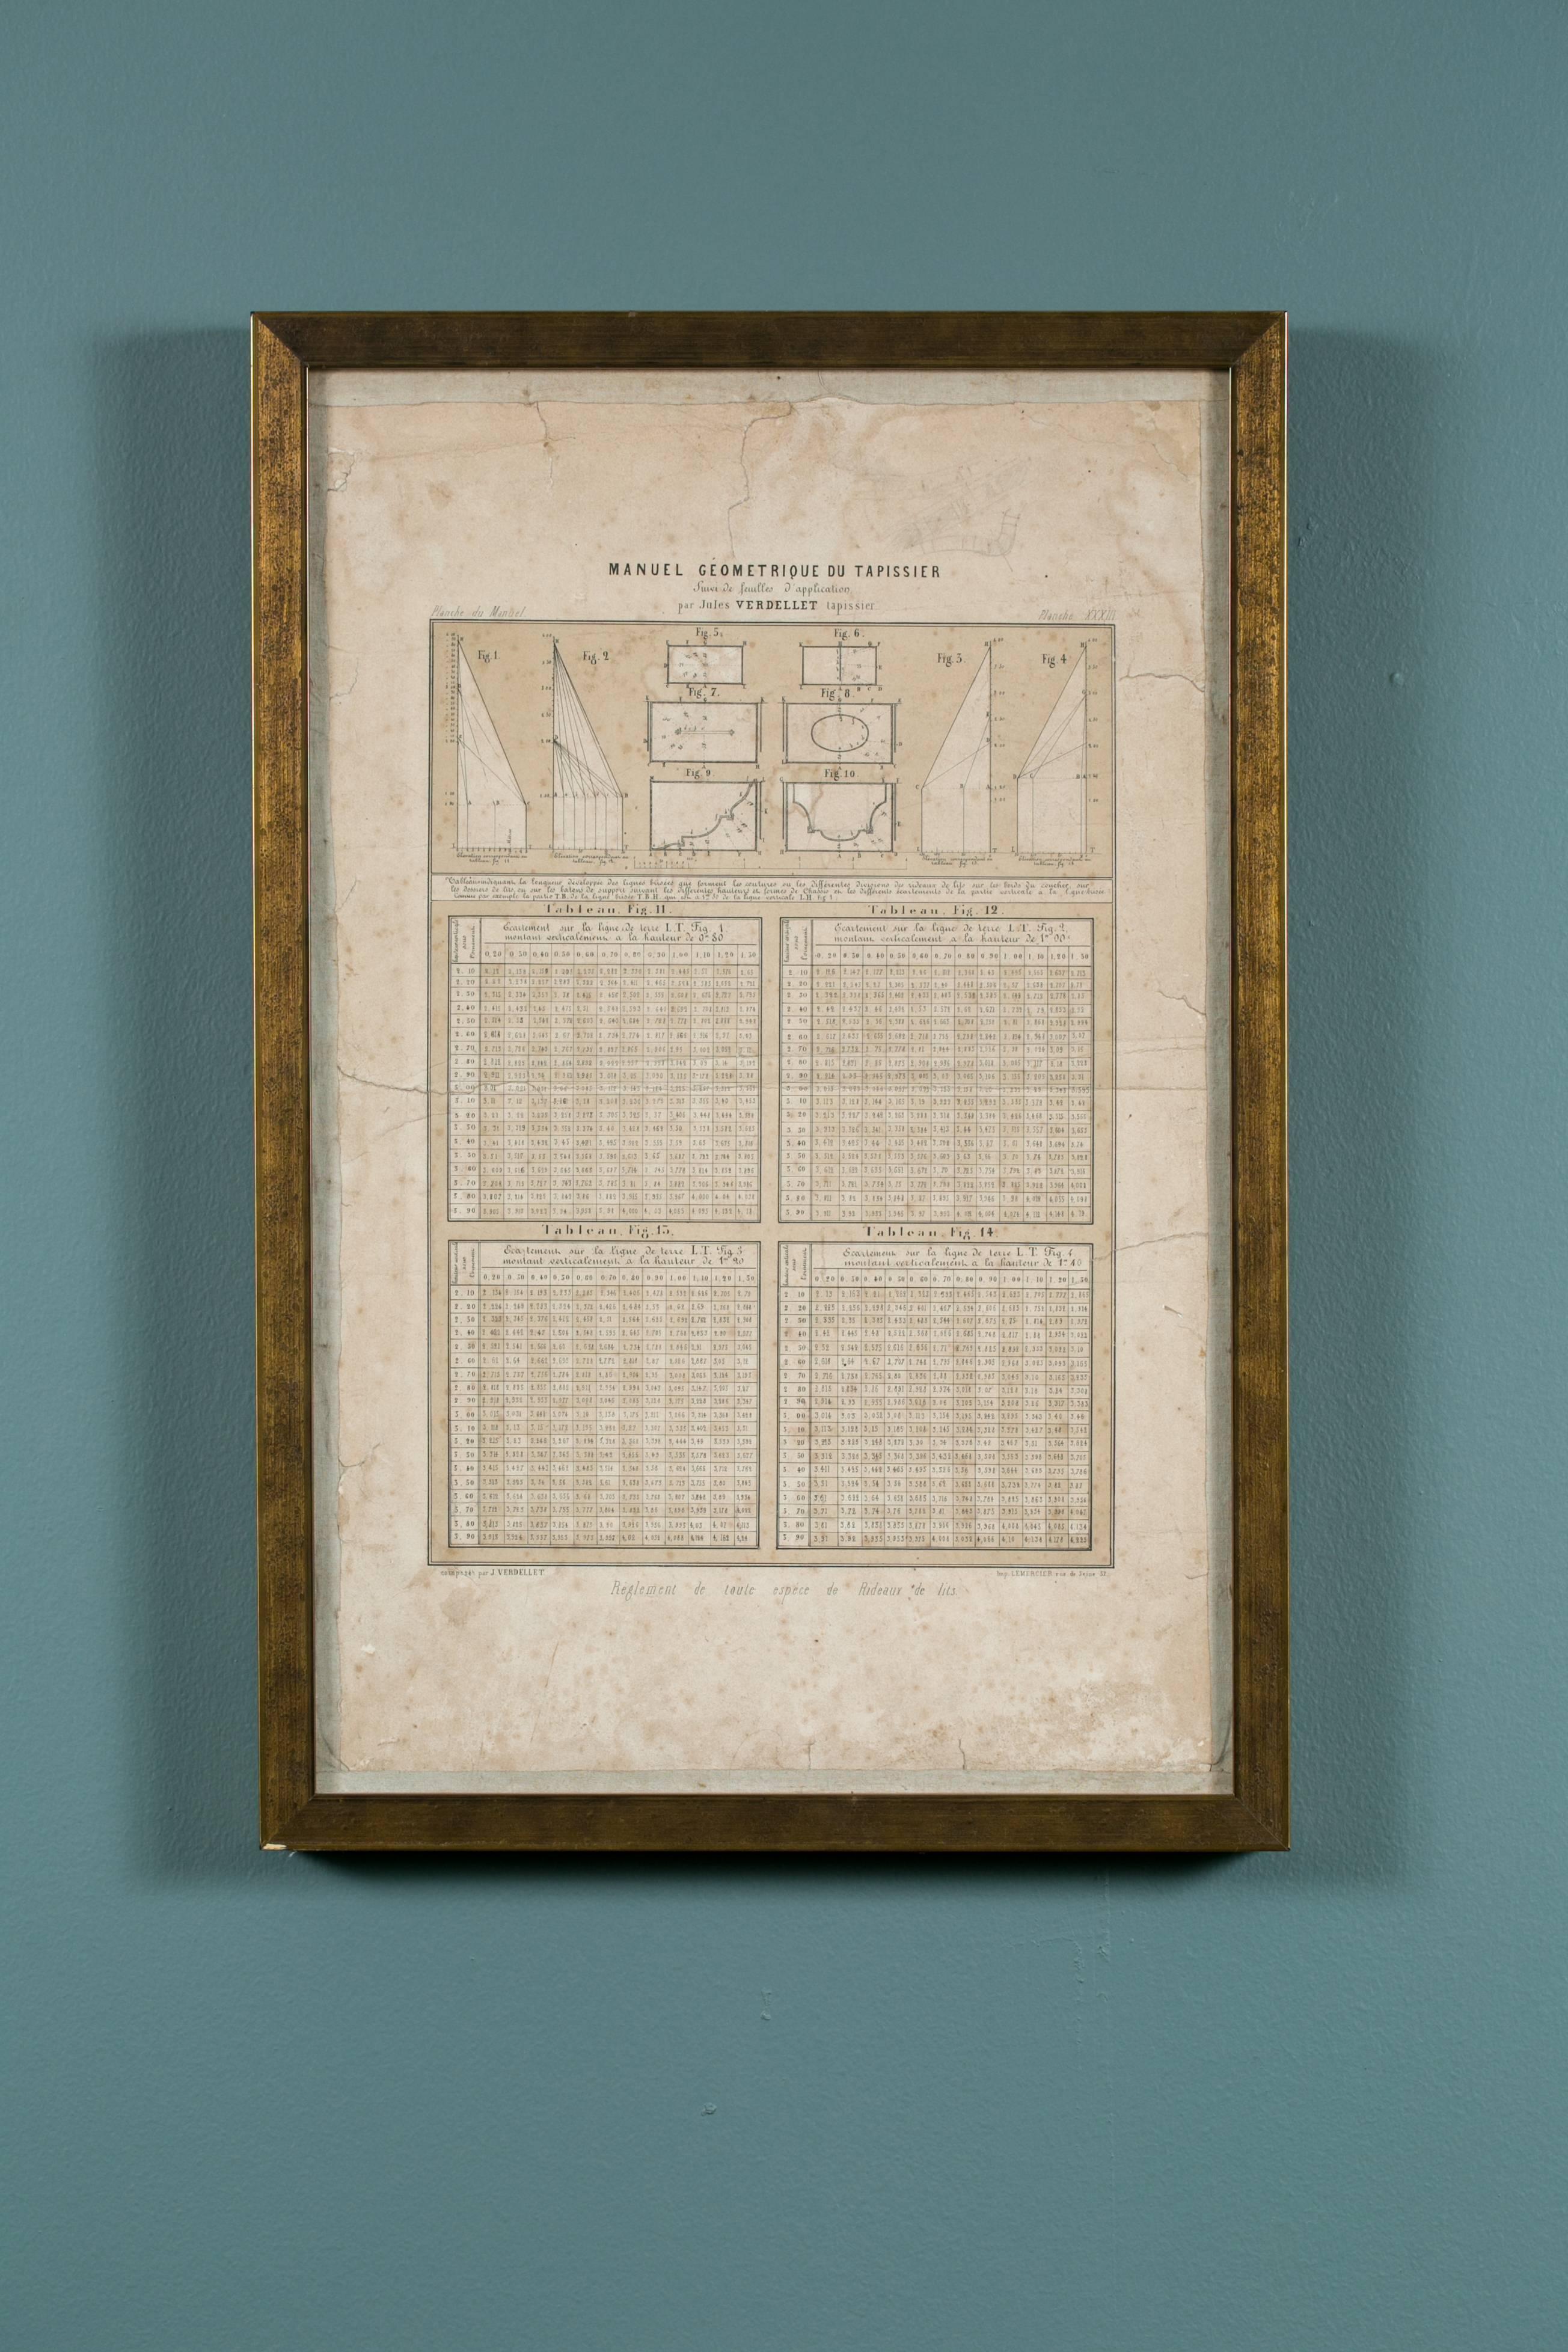 Antique French pattern making charts from Paris, newly framed. Two pages from Jules Verdellet’s Manuel Géométrique du tapissier (1851). This book was an invaluable resource to drapery workrooms throughout the mid to late 19th century, being